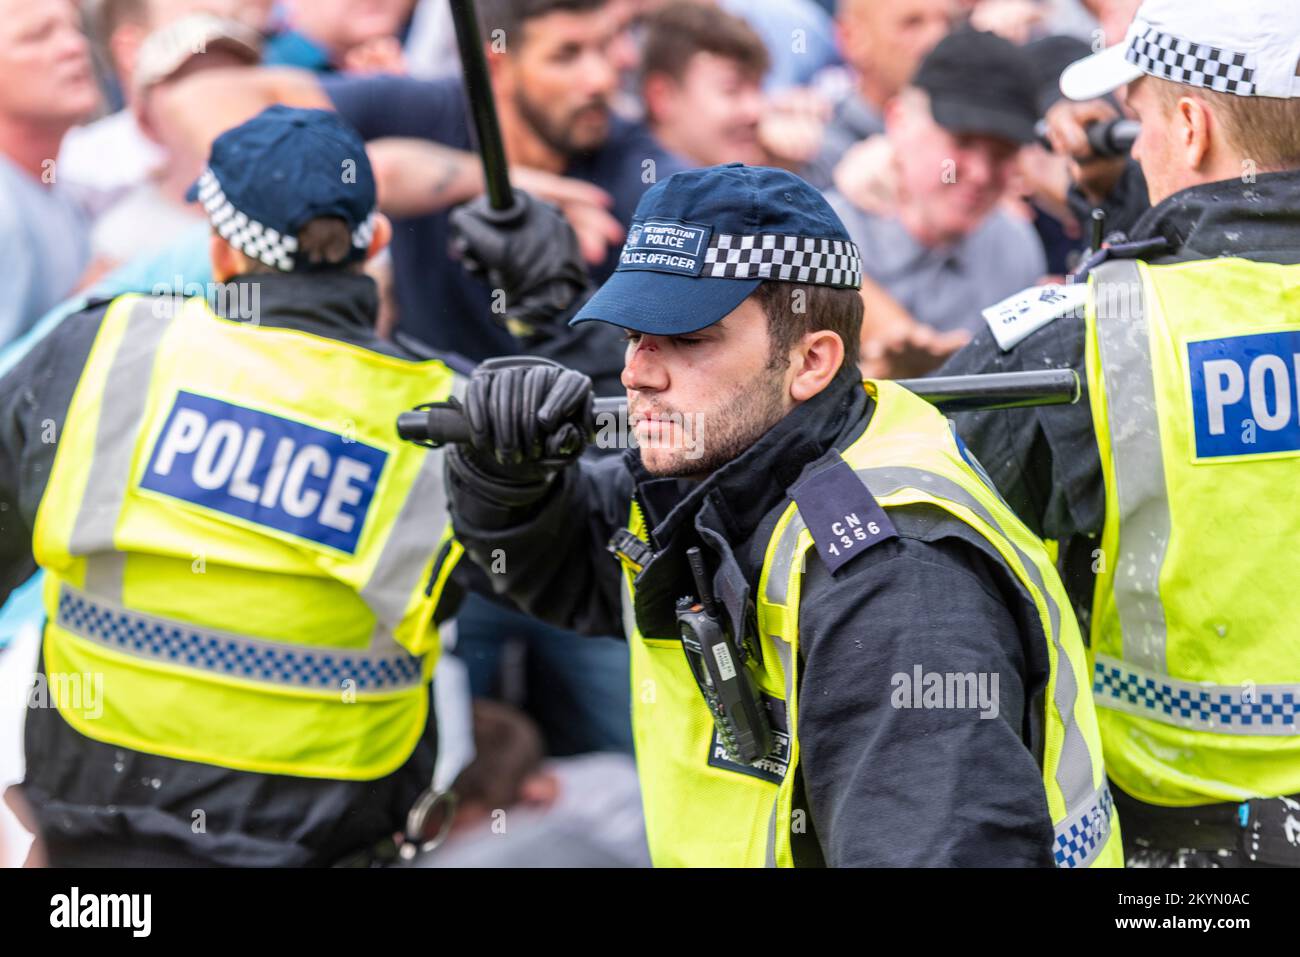 Supporters of Tommy Robinson such as the EDL protested in London demonstrating for his release after arrest. Injured police officer with bloodied nose Stock Photo